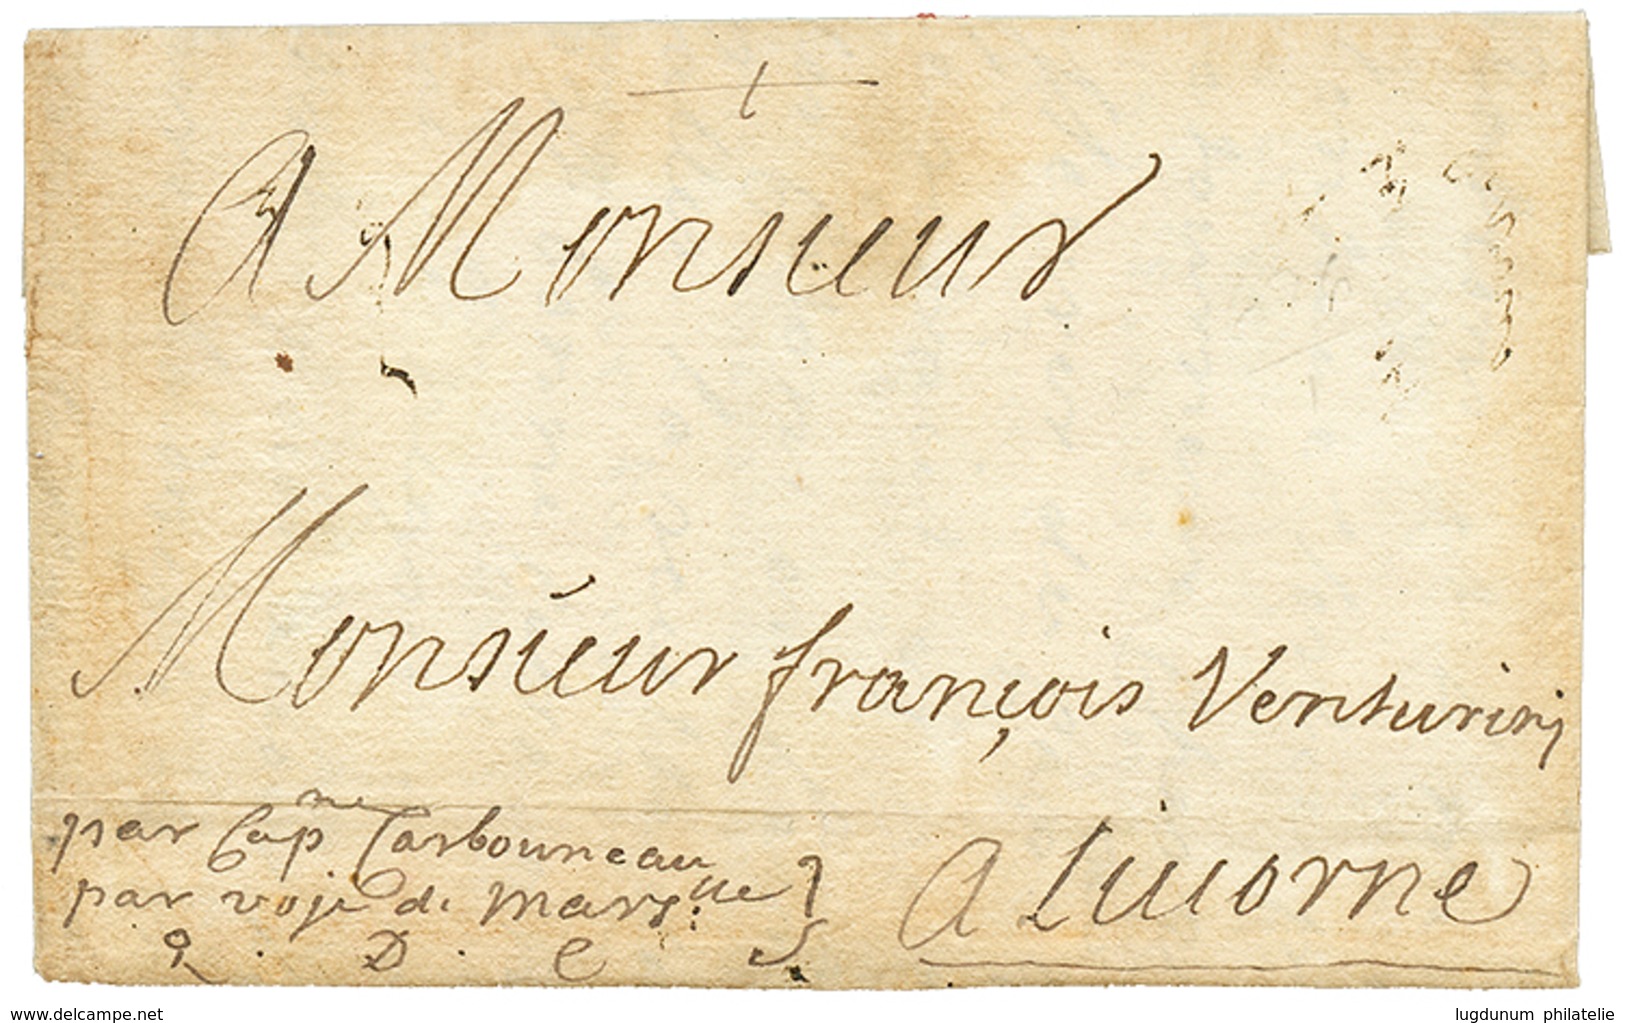 PALESTINE : 1689 Entire Letter (text In French Language) Datelined "ACRE 24 8bre 1689" To LIVORNO (ITALY). Rare So Early - Palestine